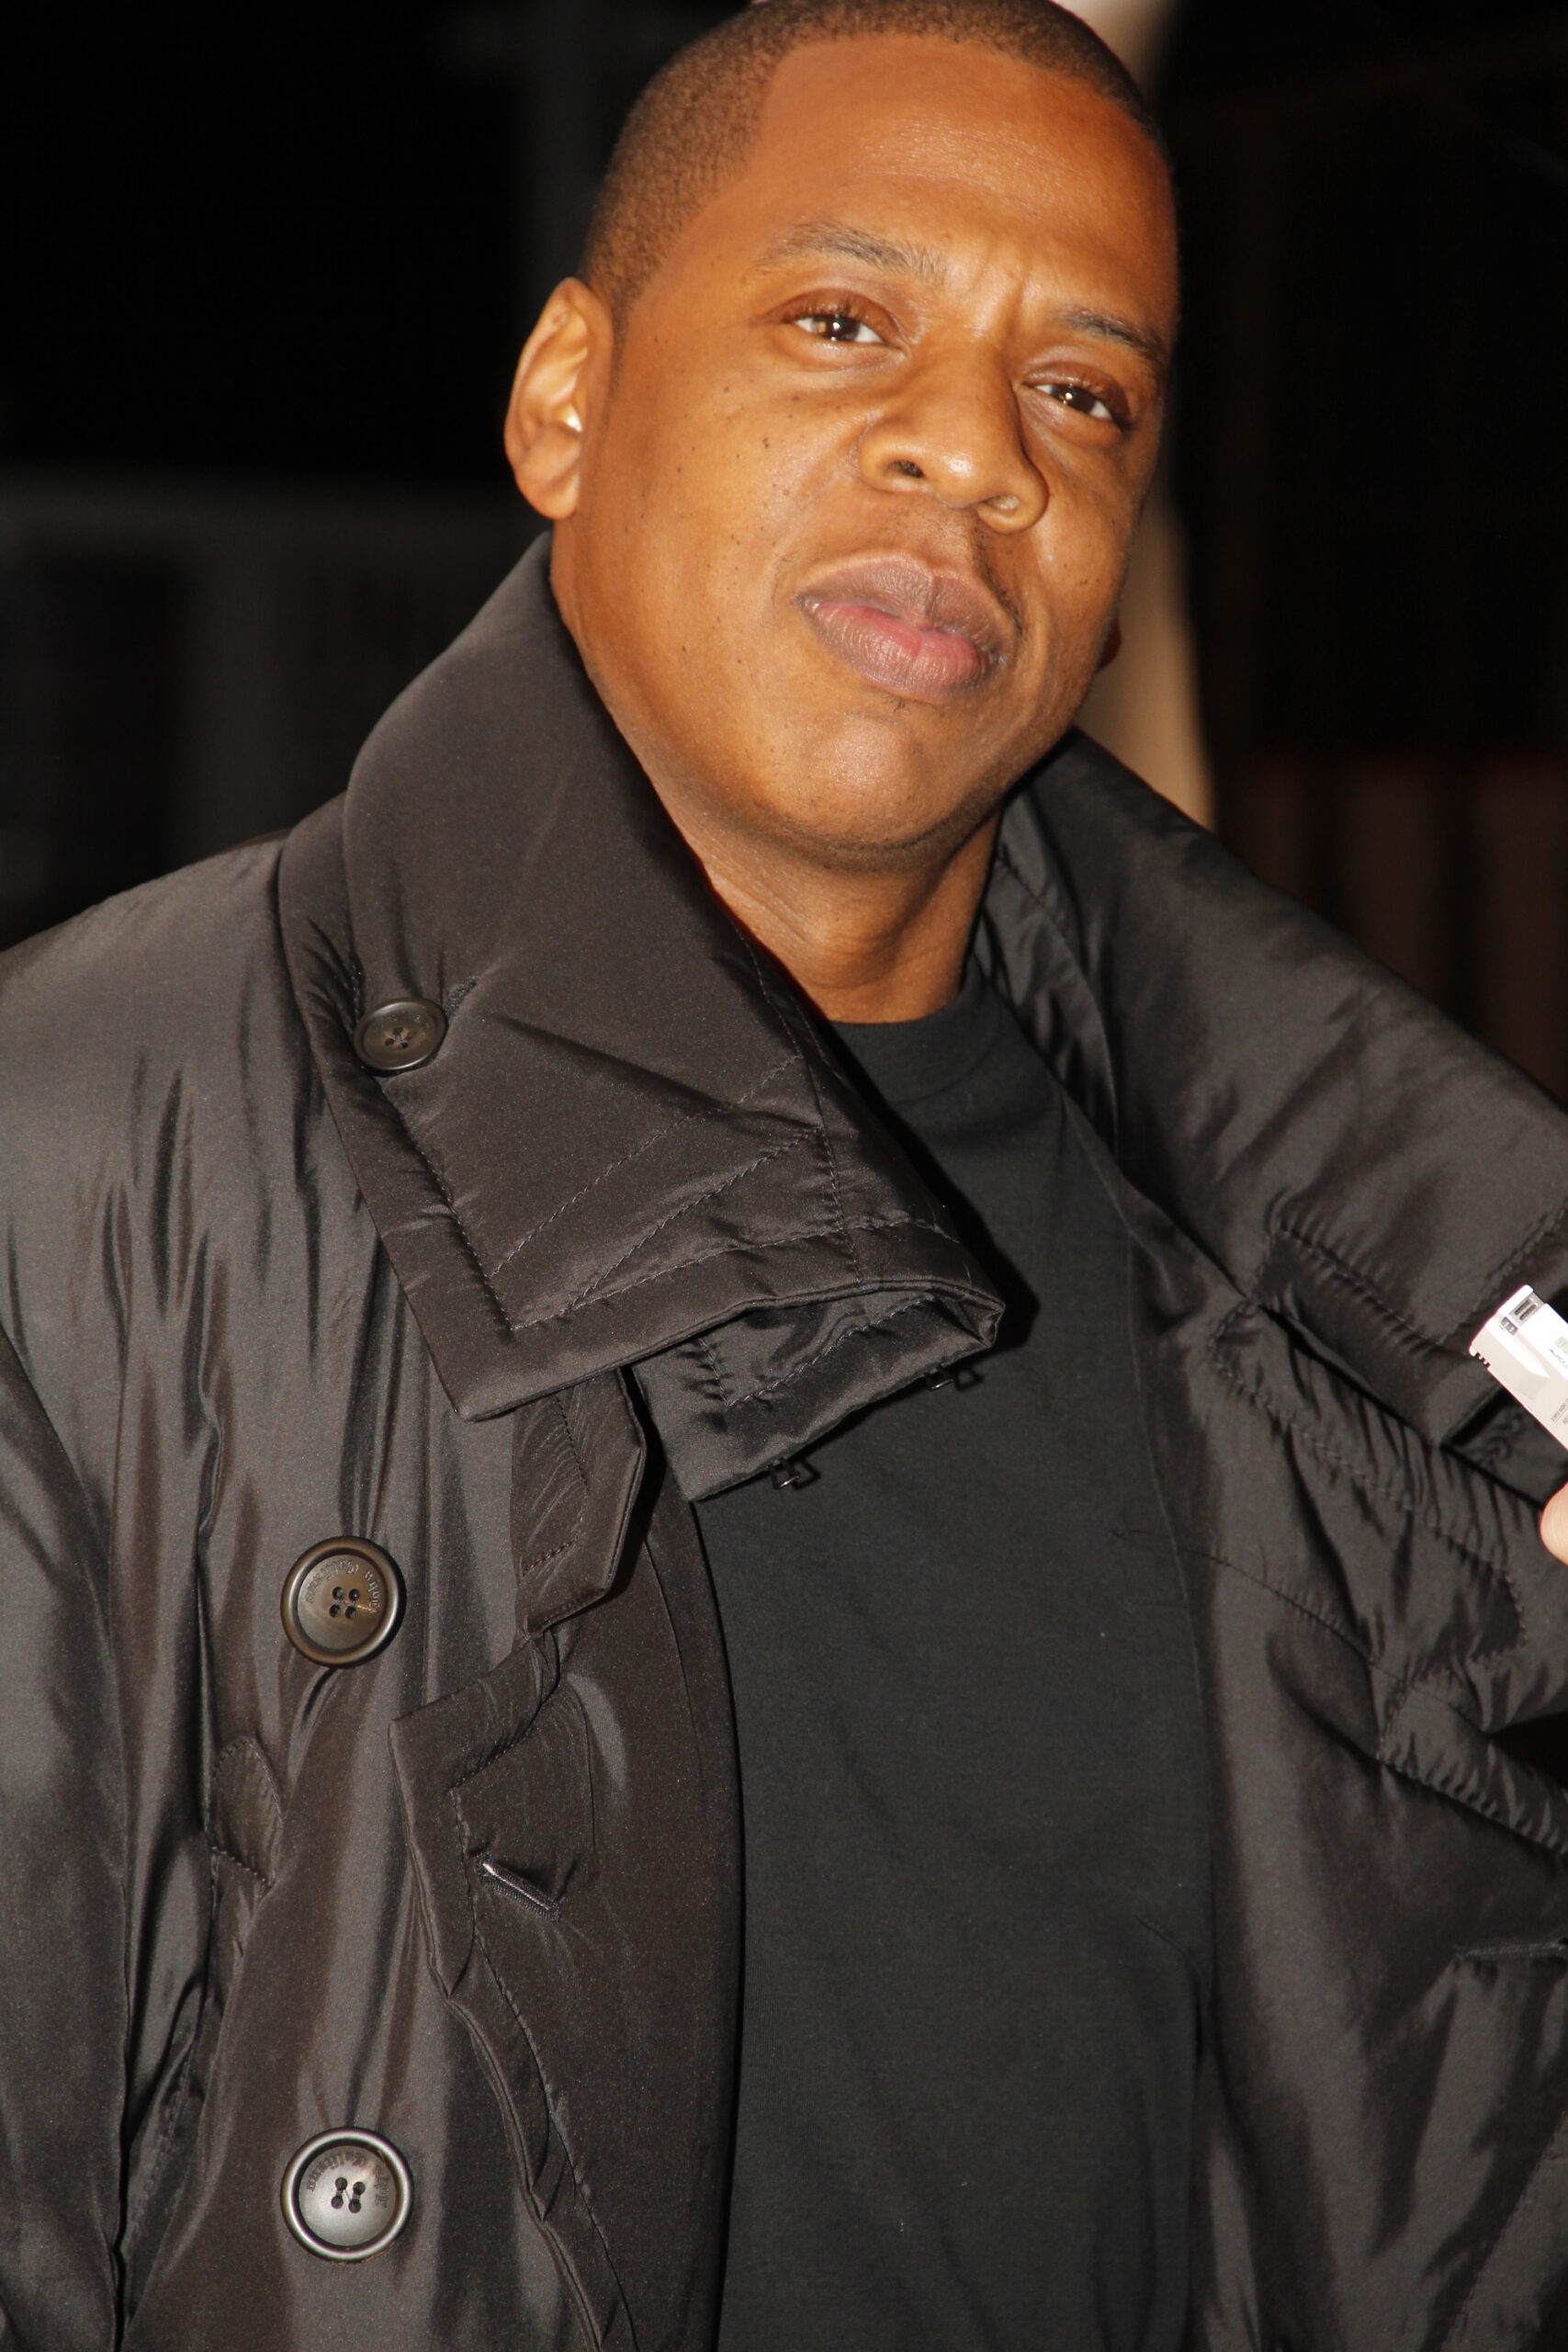 JAY-Z  Biography, Songs, Empire State of Mind, Beyonce, & Facts